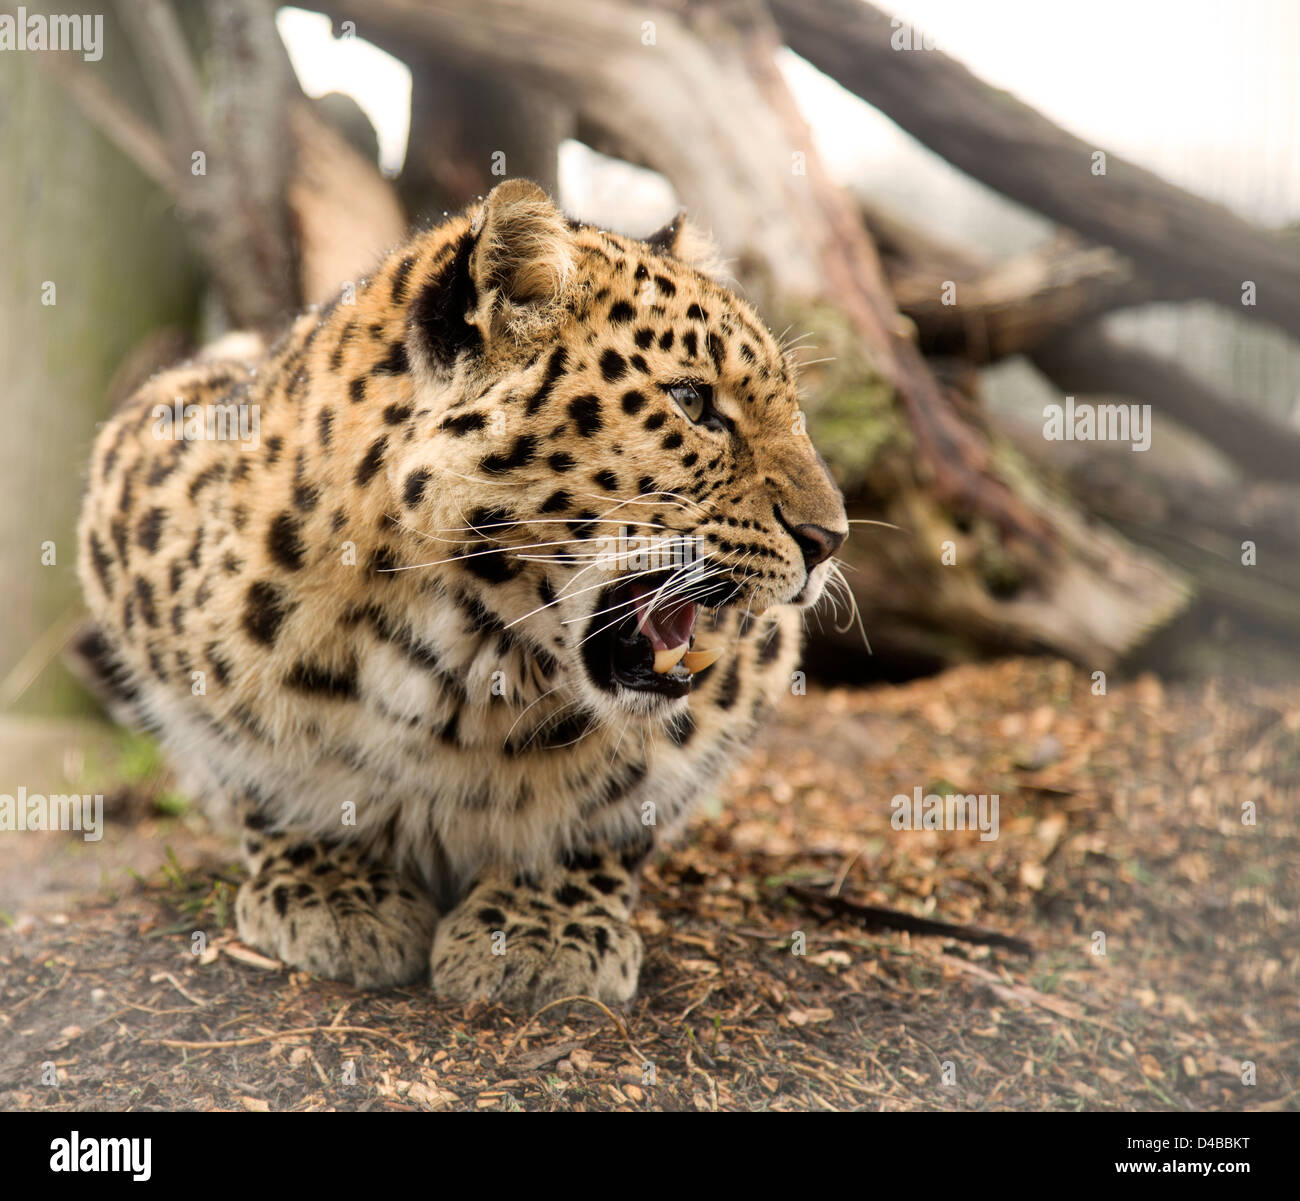 Amur leopard on its haunches up growling looking to the side Stock Photo